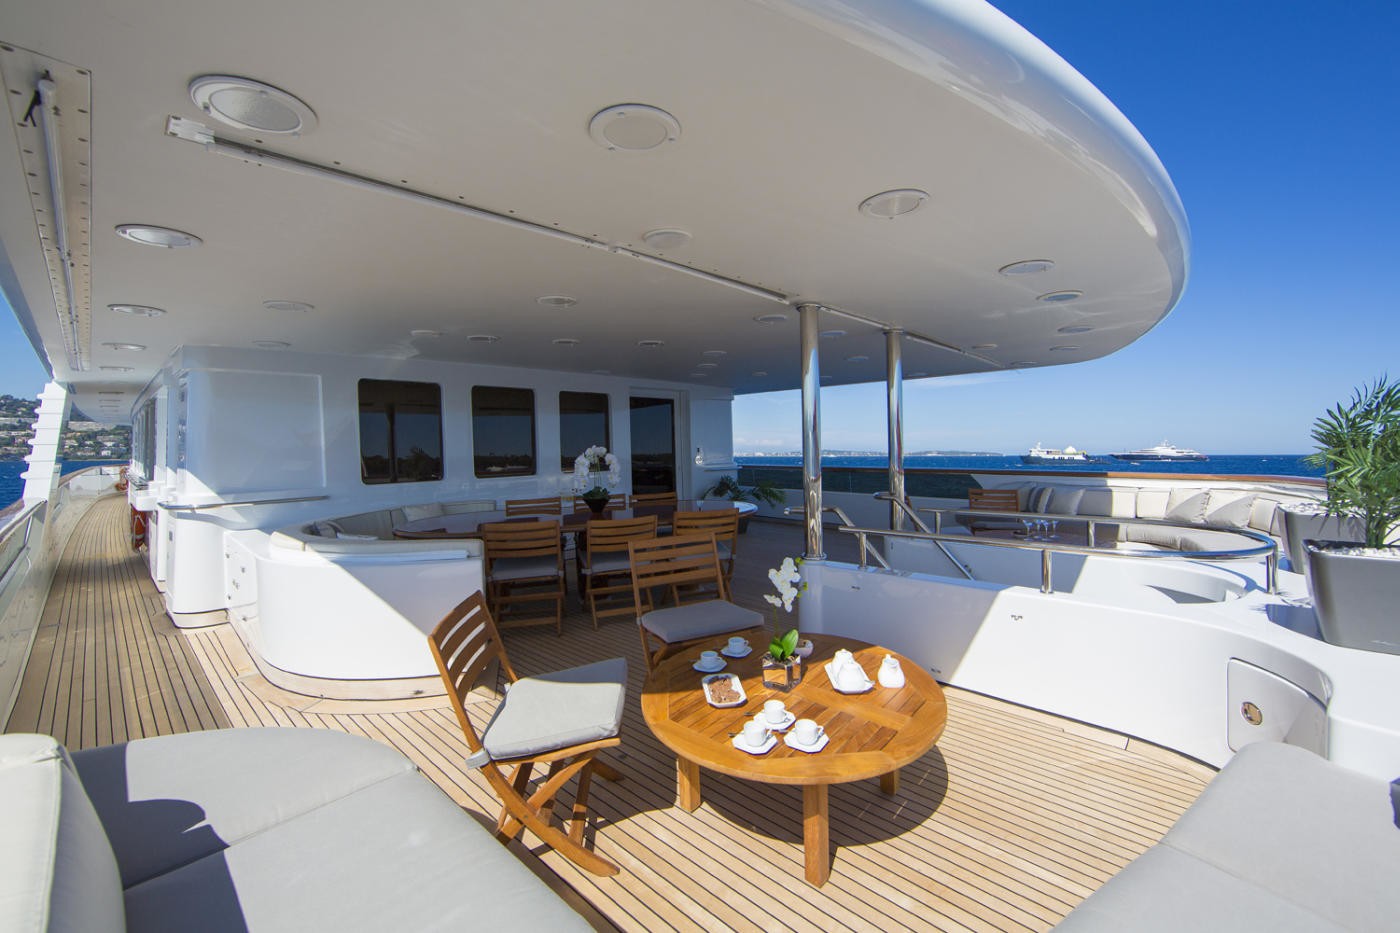 Sitting: Yacht KANALOA's Top Deck Aft Pictured